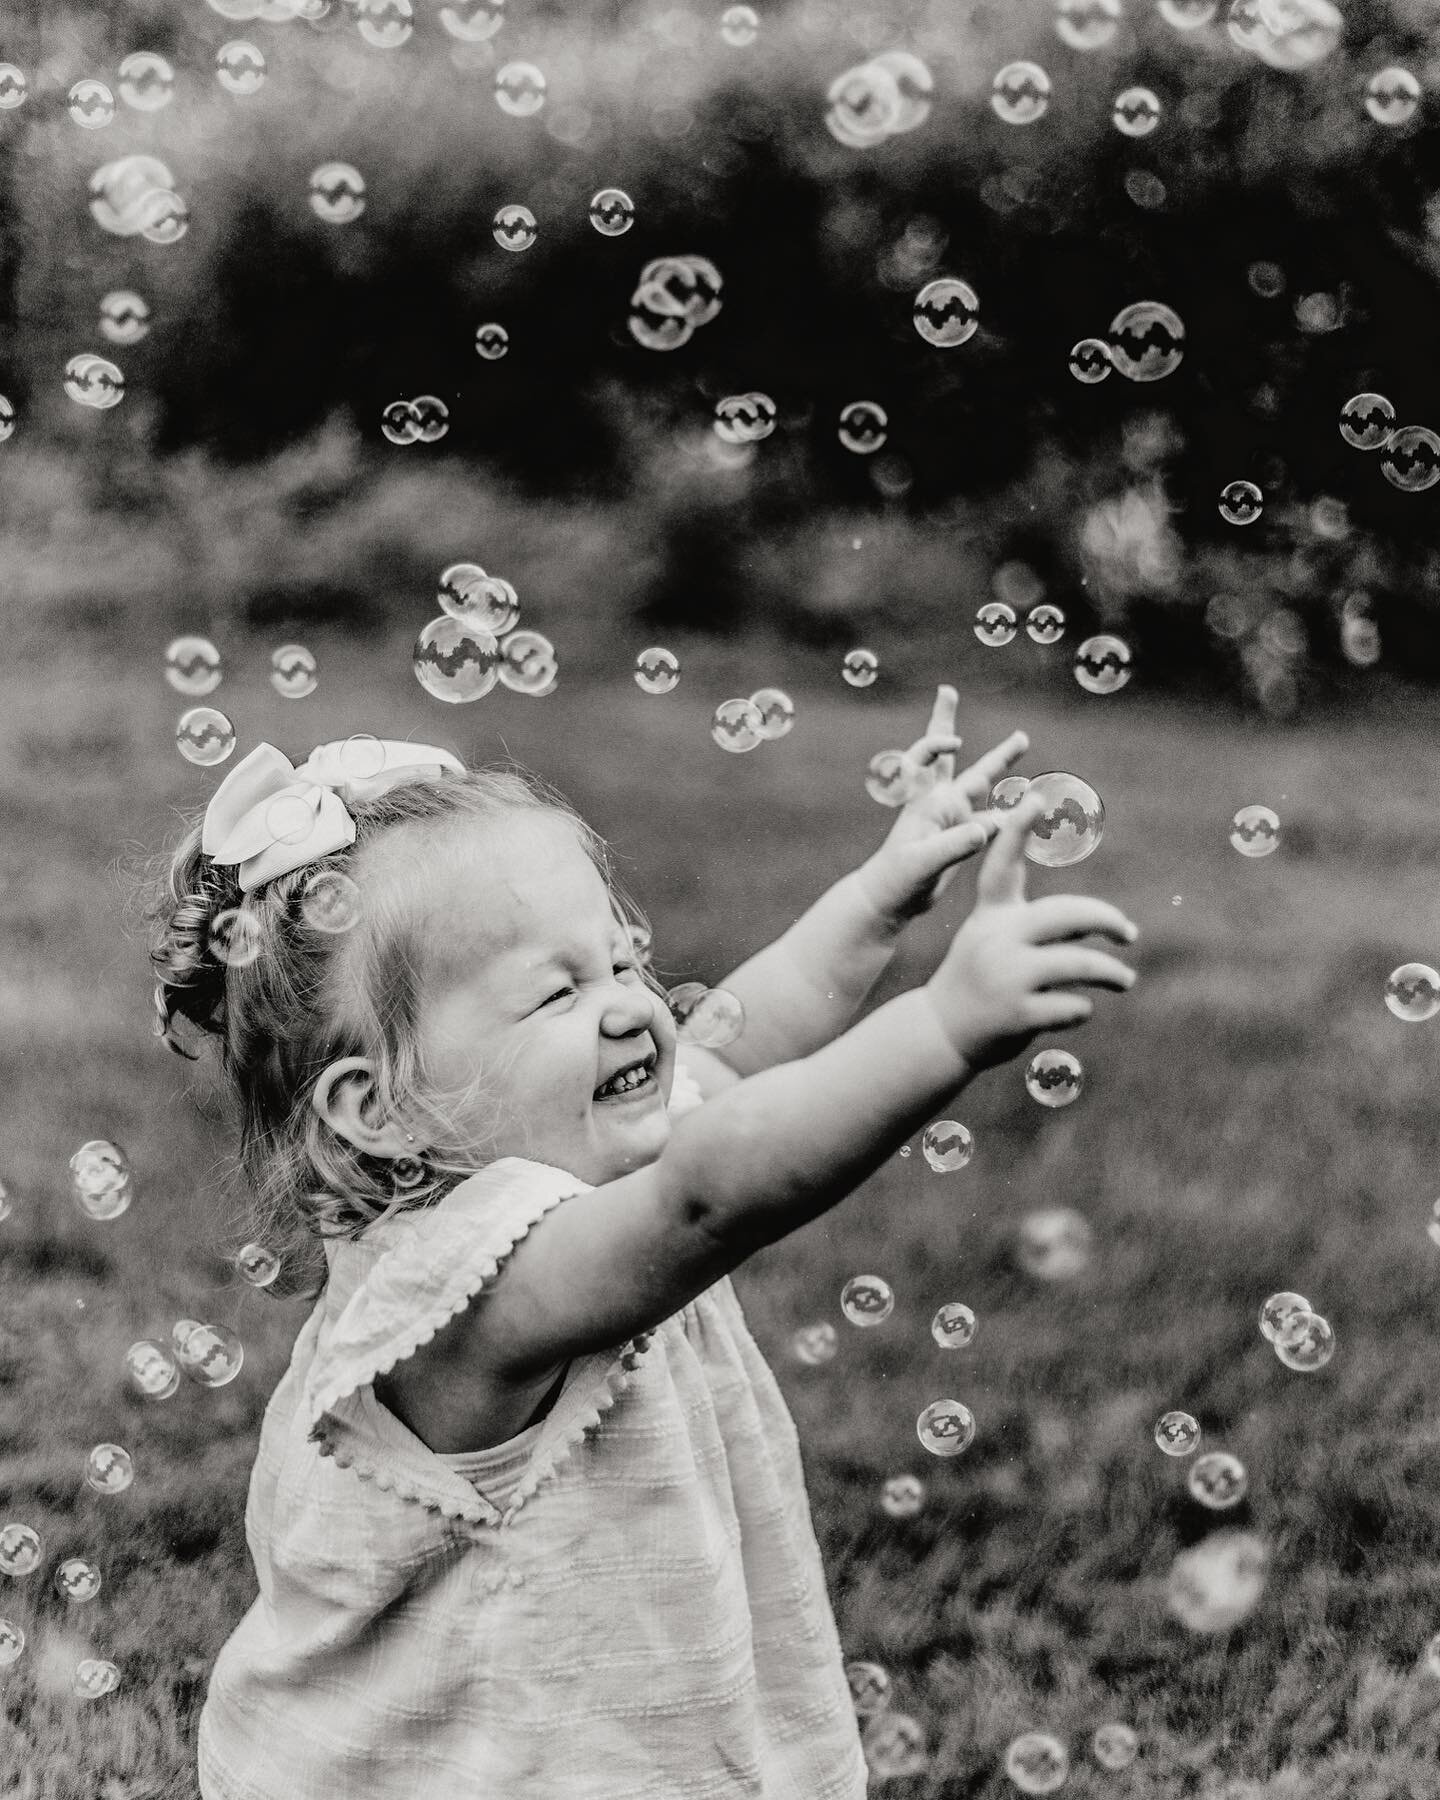 Is there anyone more joyful than a little kid who is chasing bubbles?